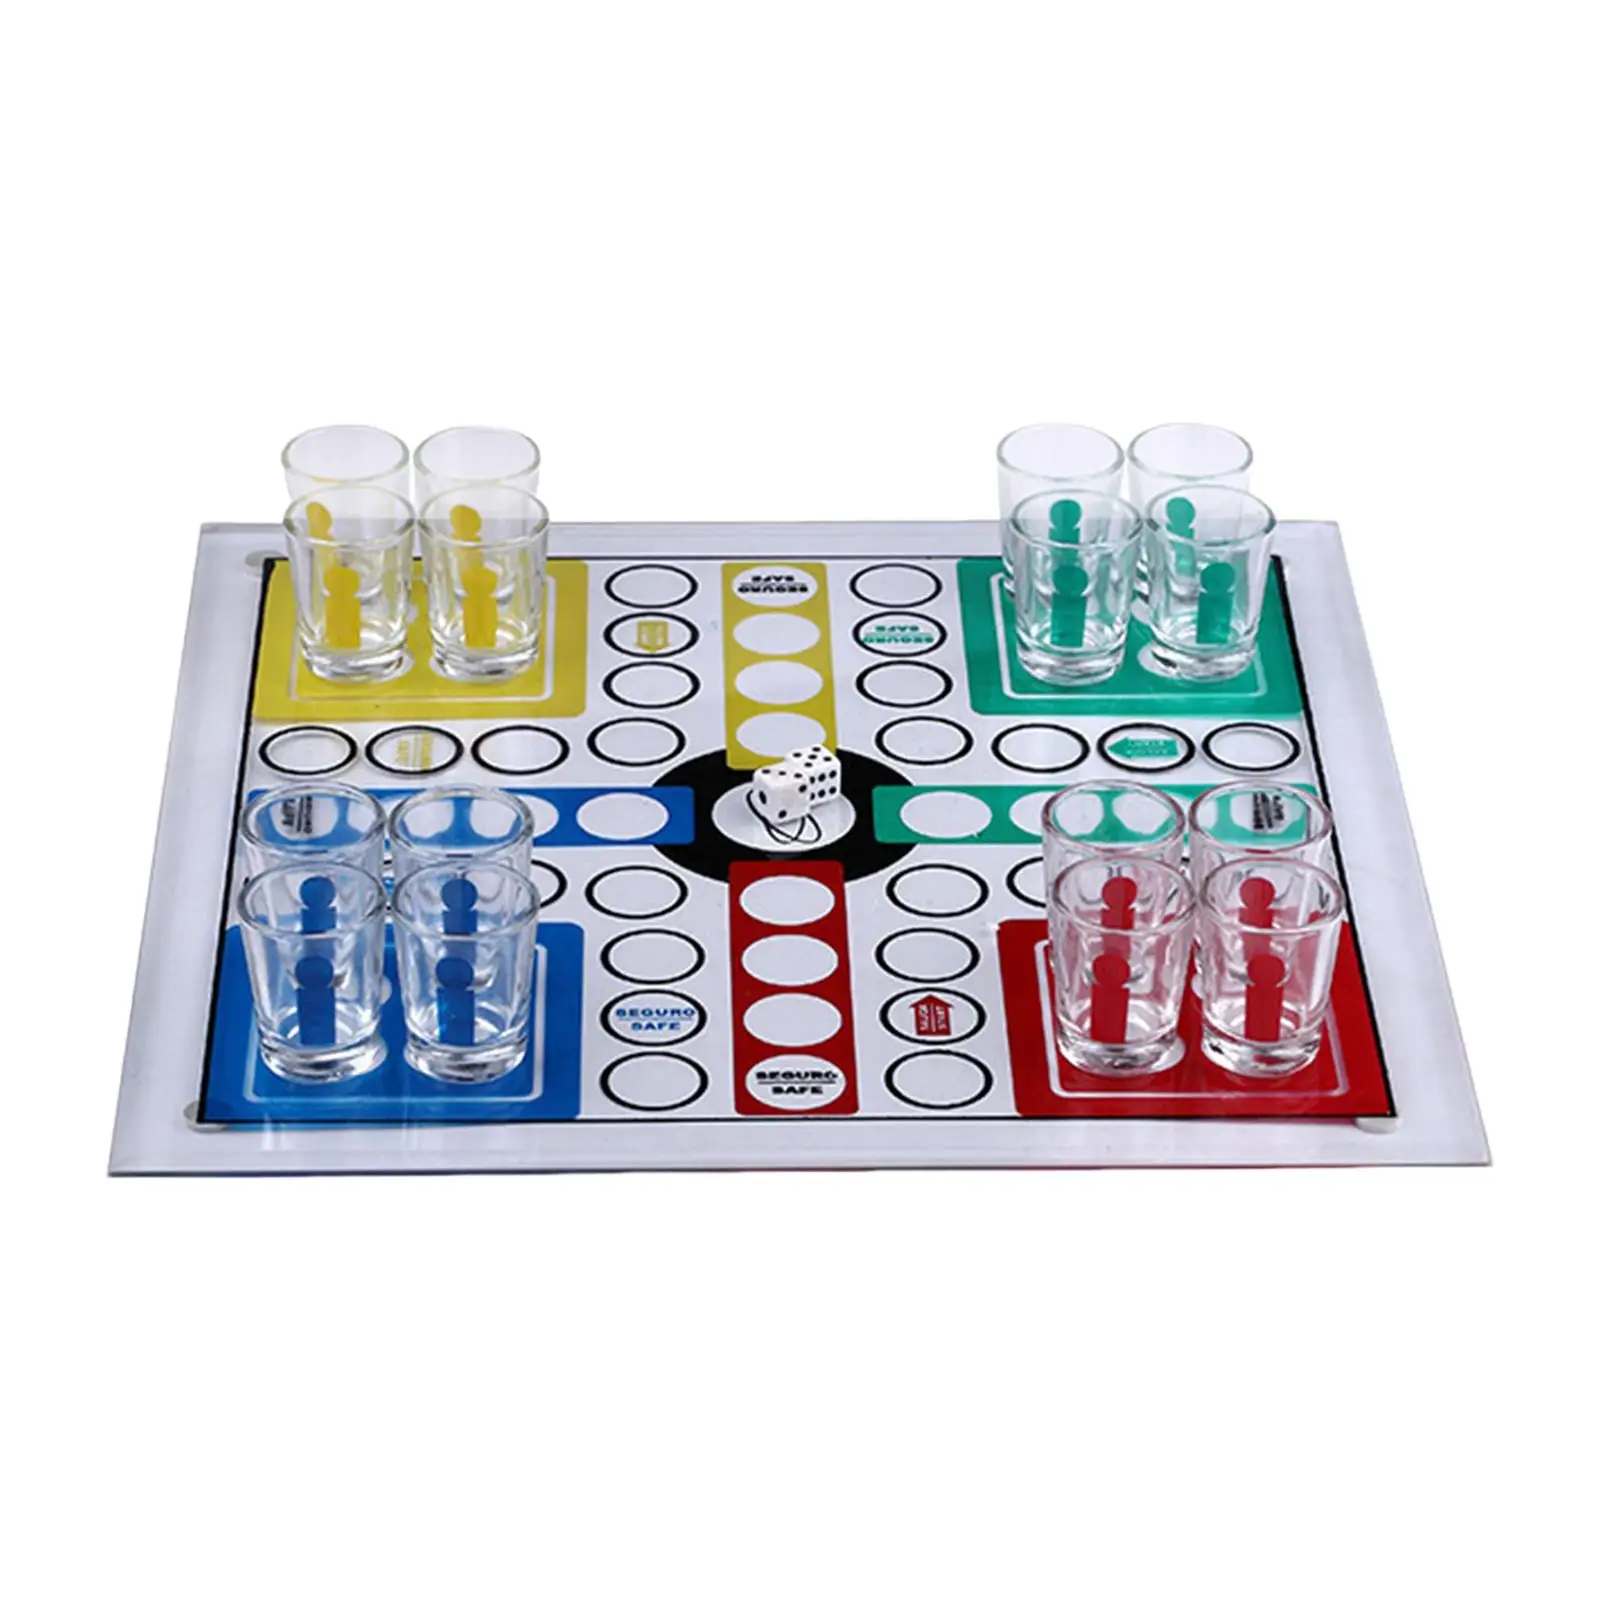 Flying Chess Games Novelty Family Party Game Family Cups Games Chess Board Games Table Games for Easter Wedding Cafe Hotel Home